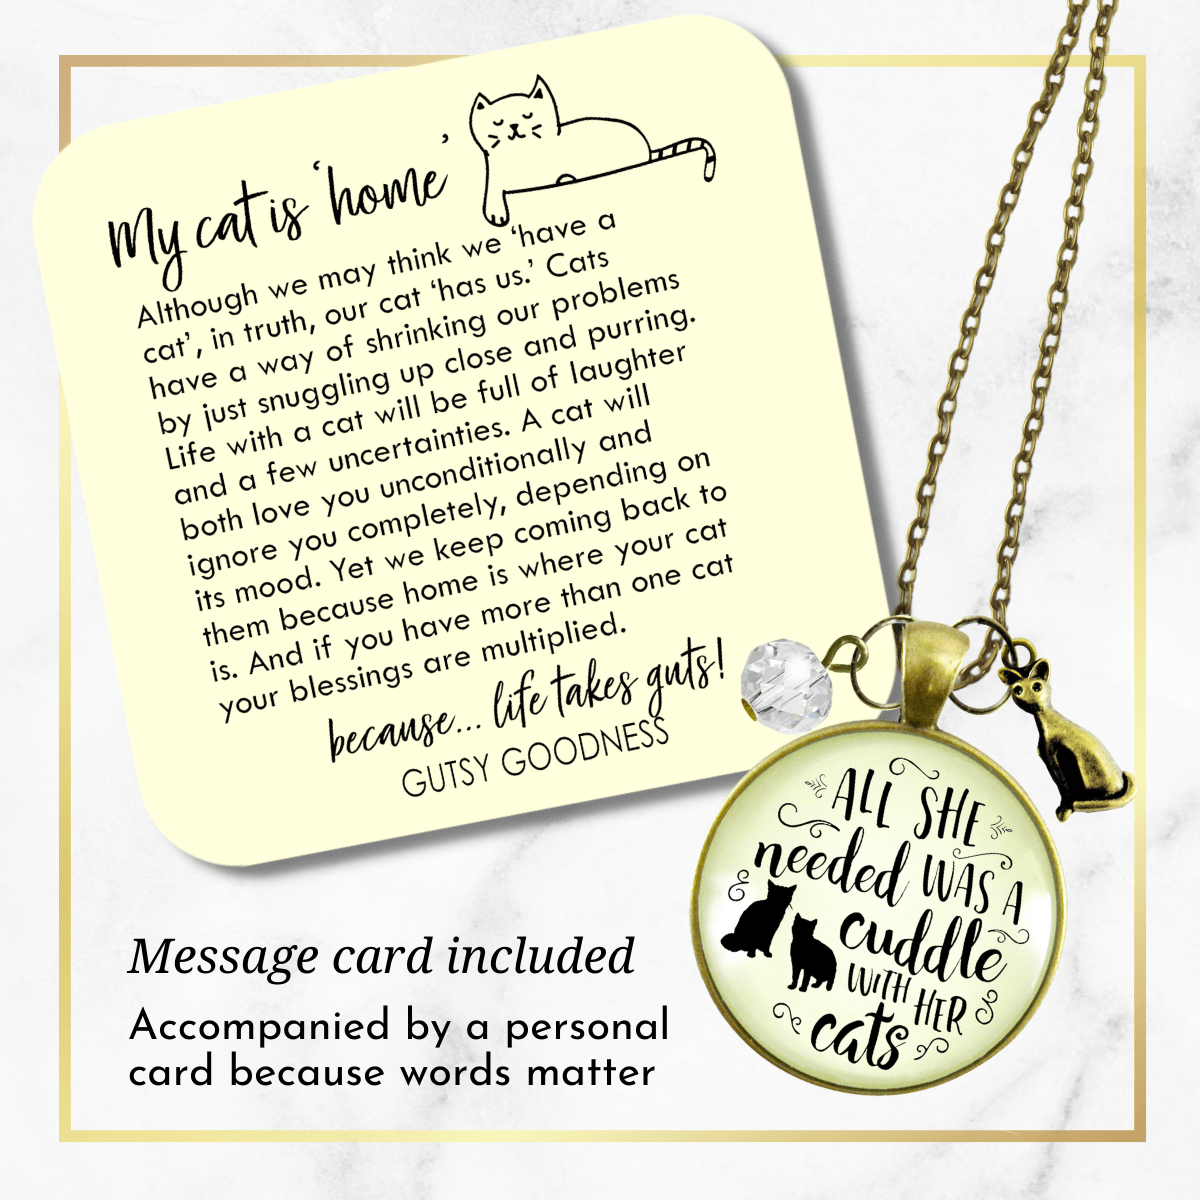 Gutsy Goodness Cats Necklace She Needed Cuddle Quote Kitty Theme Gift Womens Jewelry - Gutsy Goodness Handmade Jewelry;Cats Necklace She Needed Cuddle Quote Kitty Theme Gift Womens Jewelry - Gutsy Goodness Handmade Jewelry Gifts